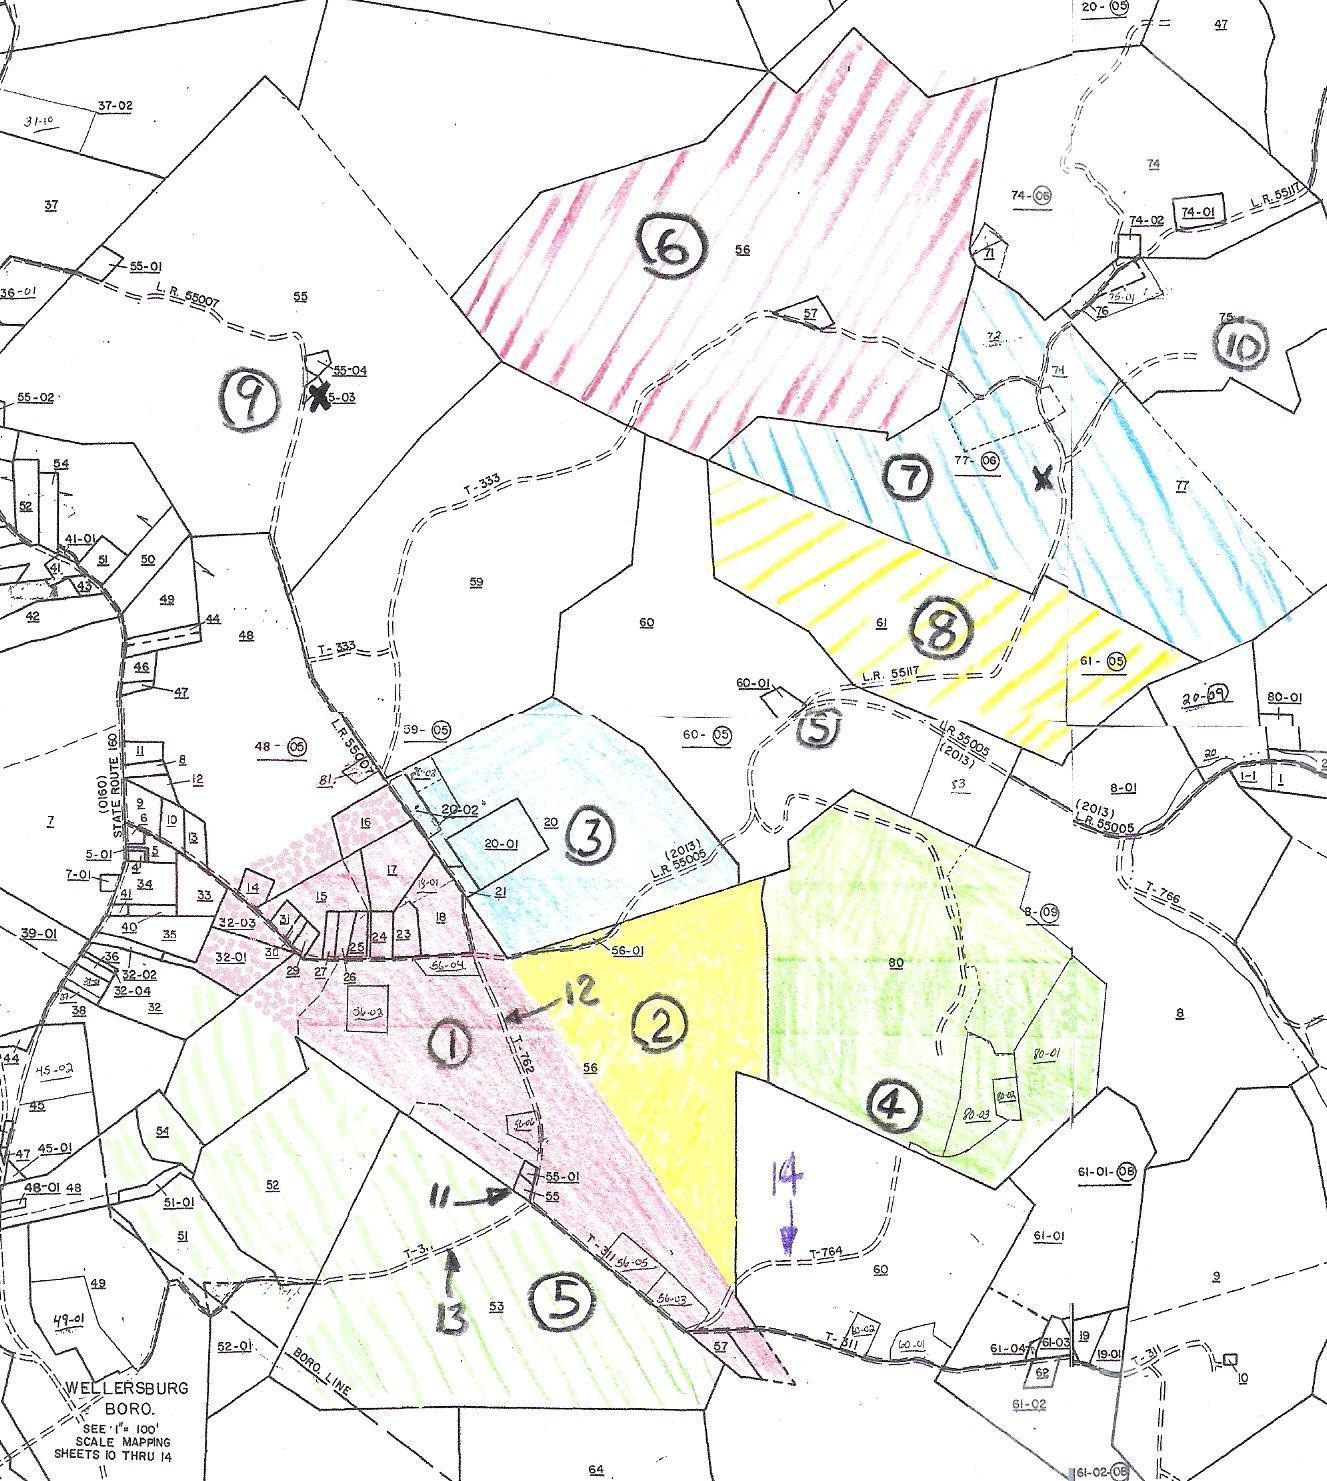 Michael Korns, Sr. tracts 1 & 2, shown on 2008 plat map.